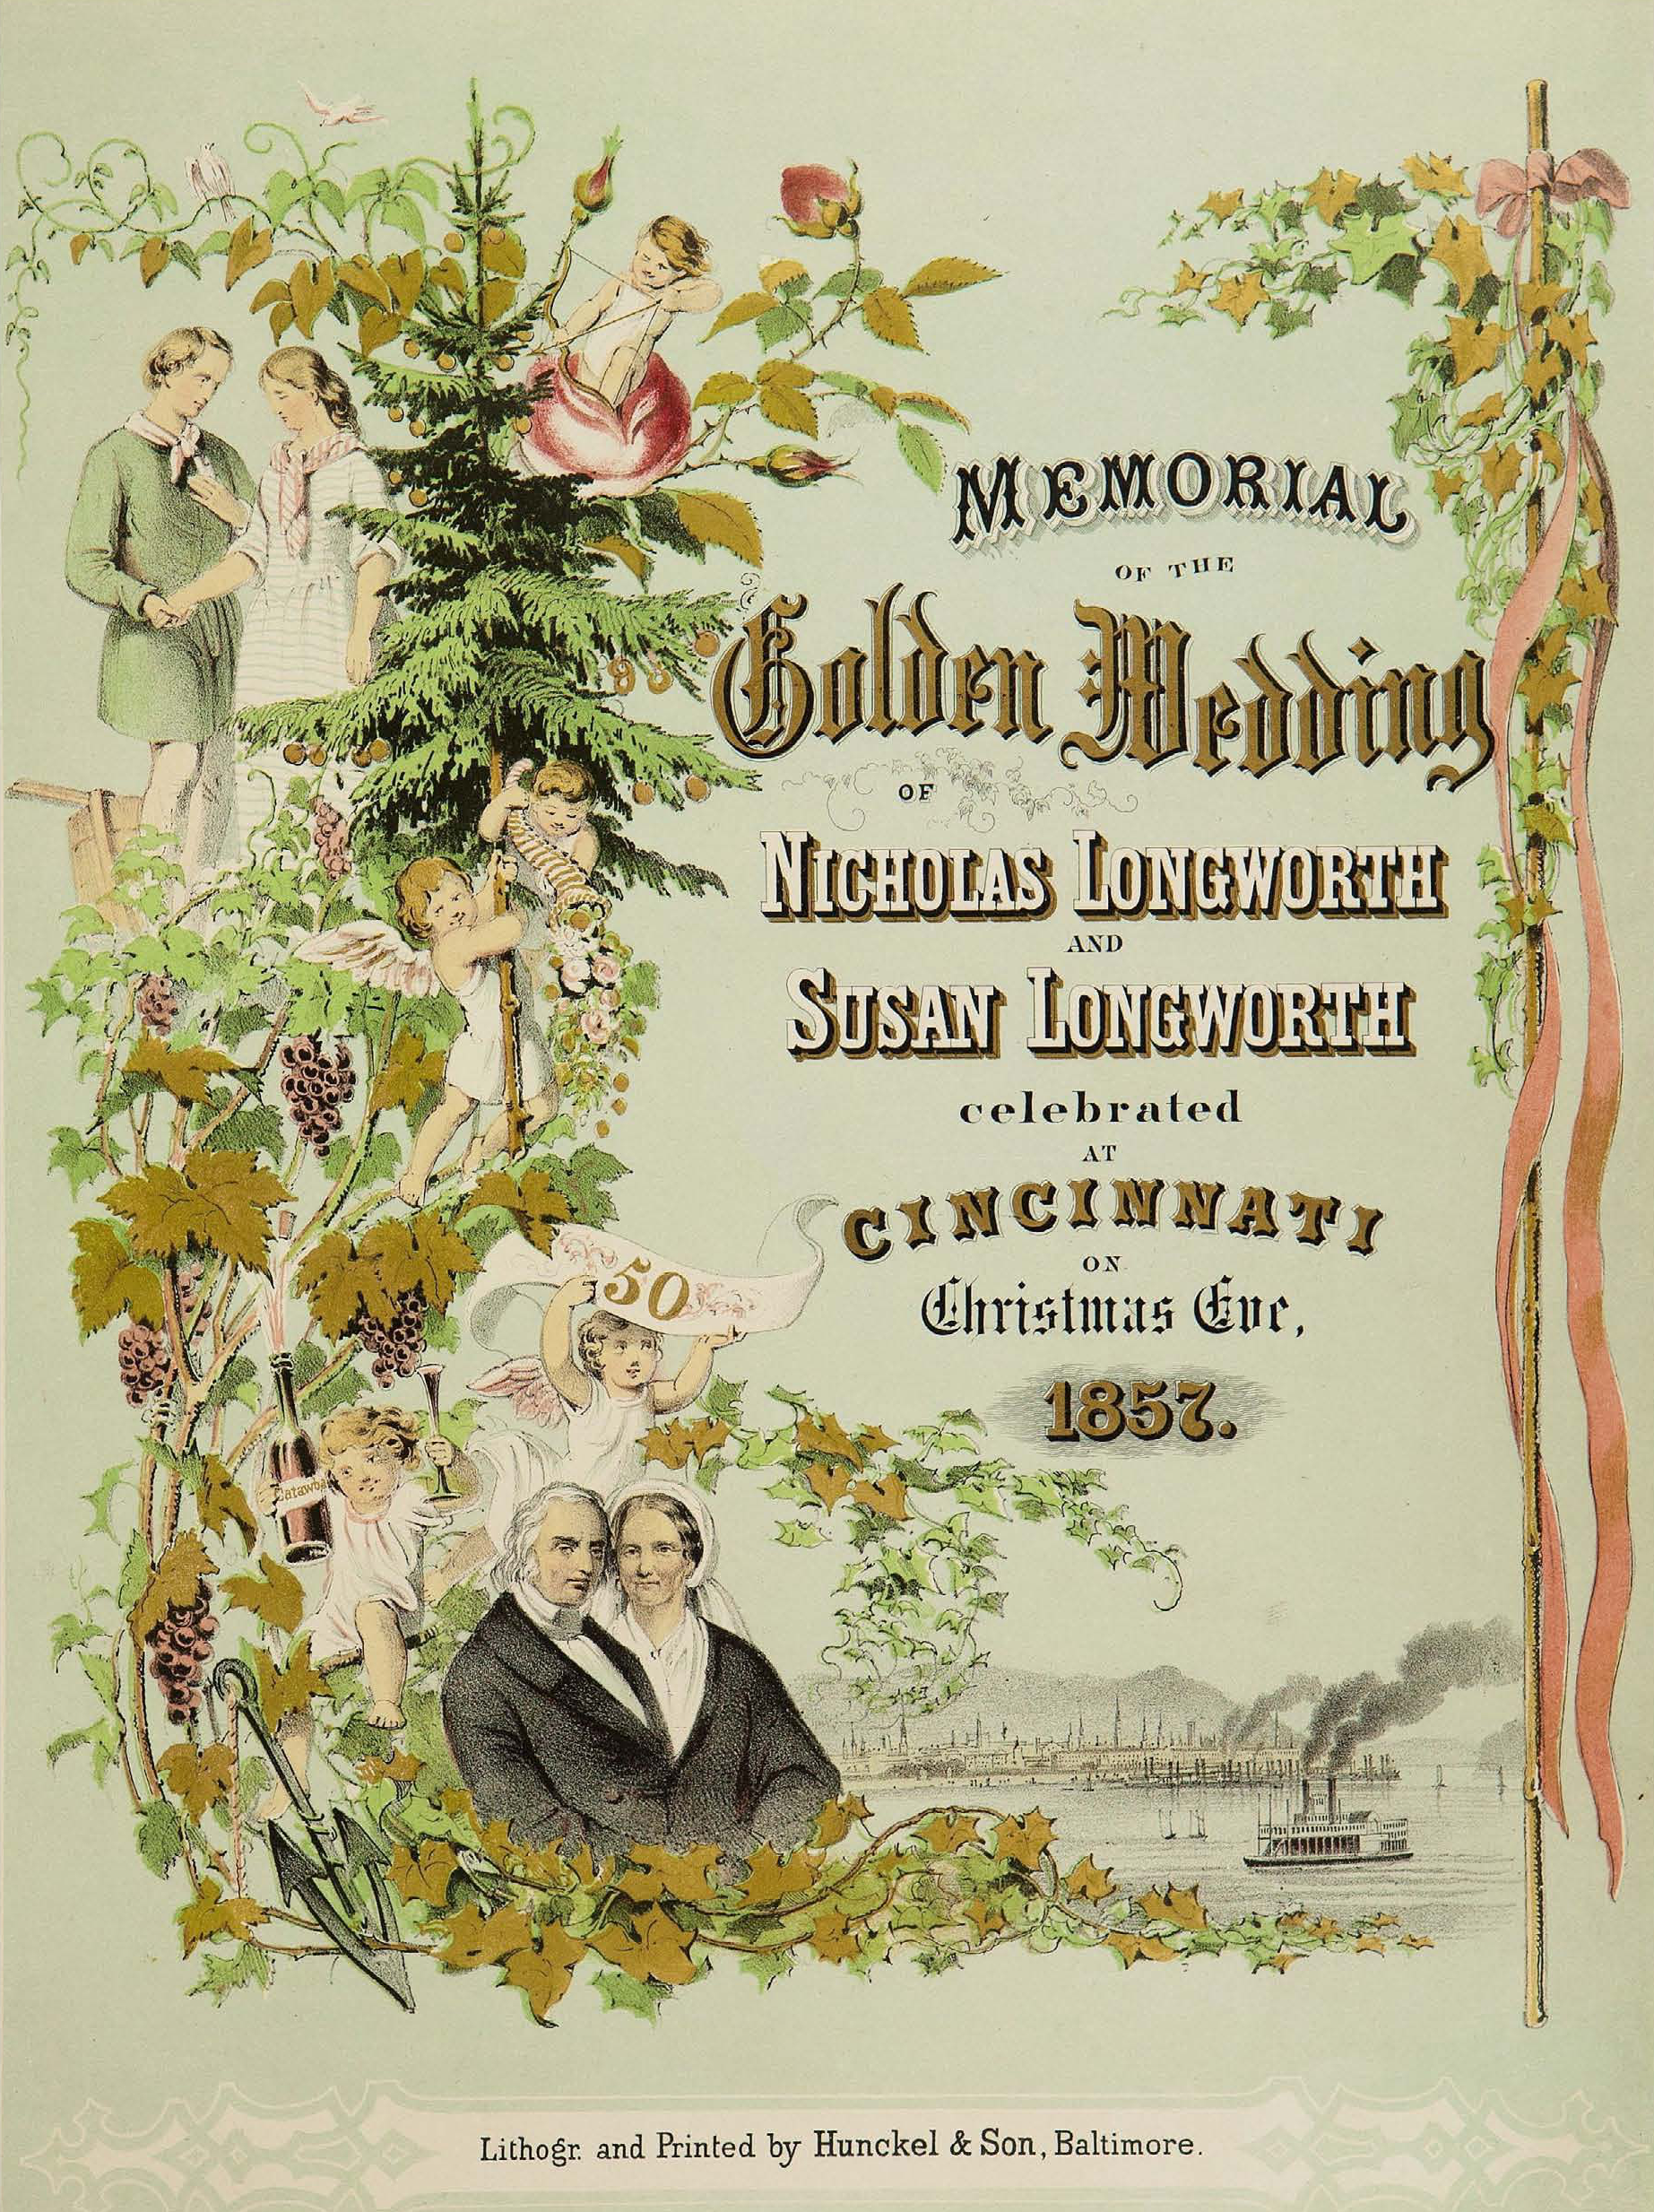 Title page, from Memorial of the Golden Wedding of Nicholas and Susan Longworth Celebrated at Cincinnati on Christmas Eve, 1857, color lithograph, Hunckel & Son, Baltimore. Taft Museum of Art